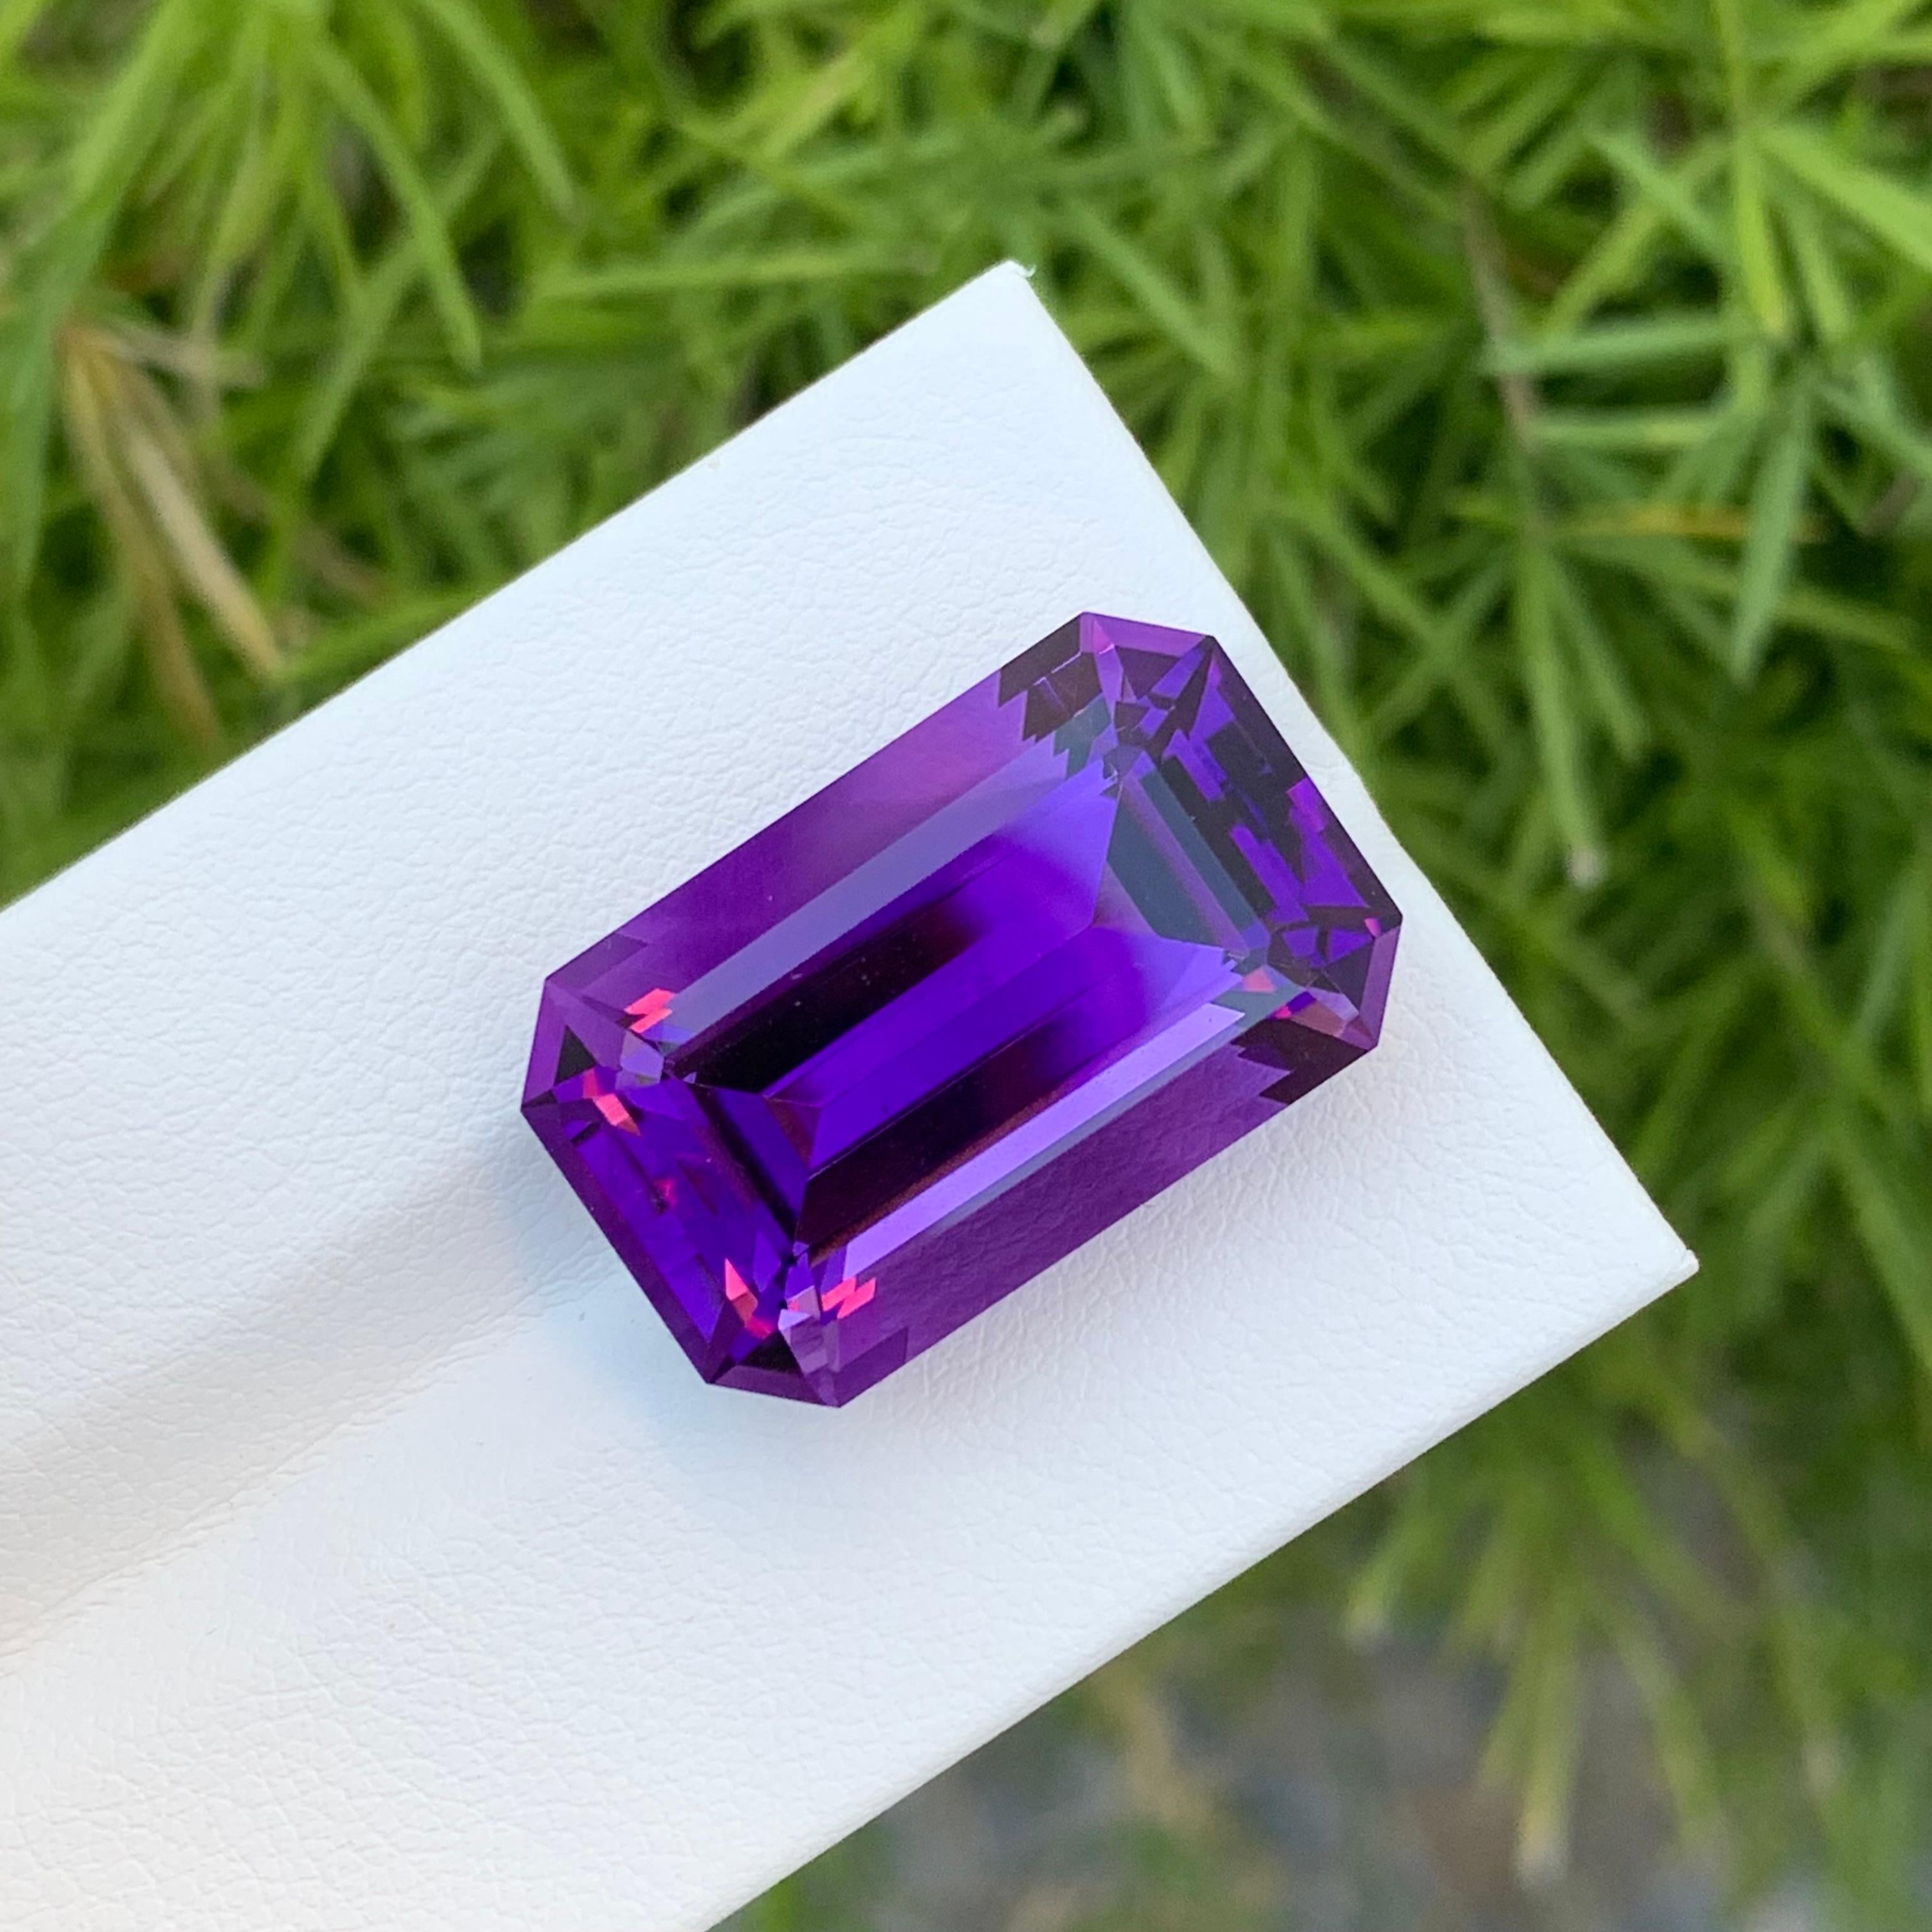 Loose Amethyst
Weight: 23.50 Carats
Dimension: 22 x 13.8 x 11 Mm
Colour: Purple
Origin: Brazil
Treatment: Non
Certificate: On Demand
Shape: Emerald 

Amethyst, a stunning variety of quartz known for its mesmerizing purple hue, has captivated humans